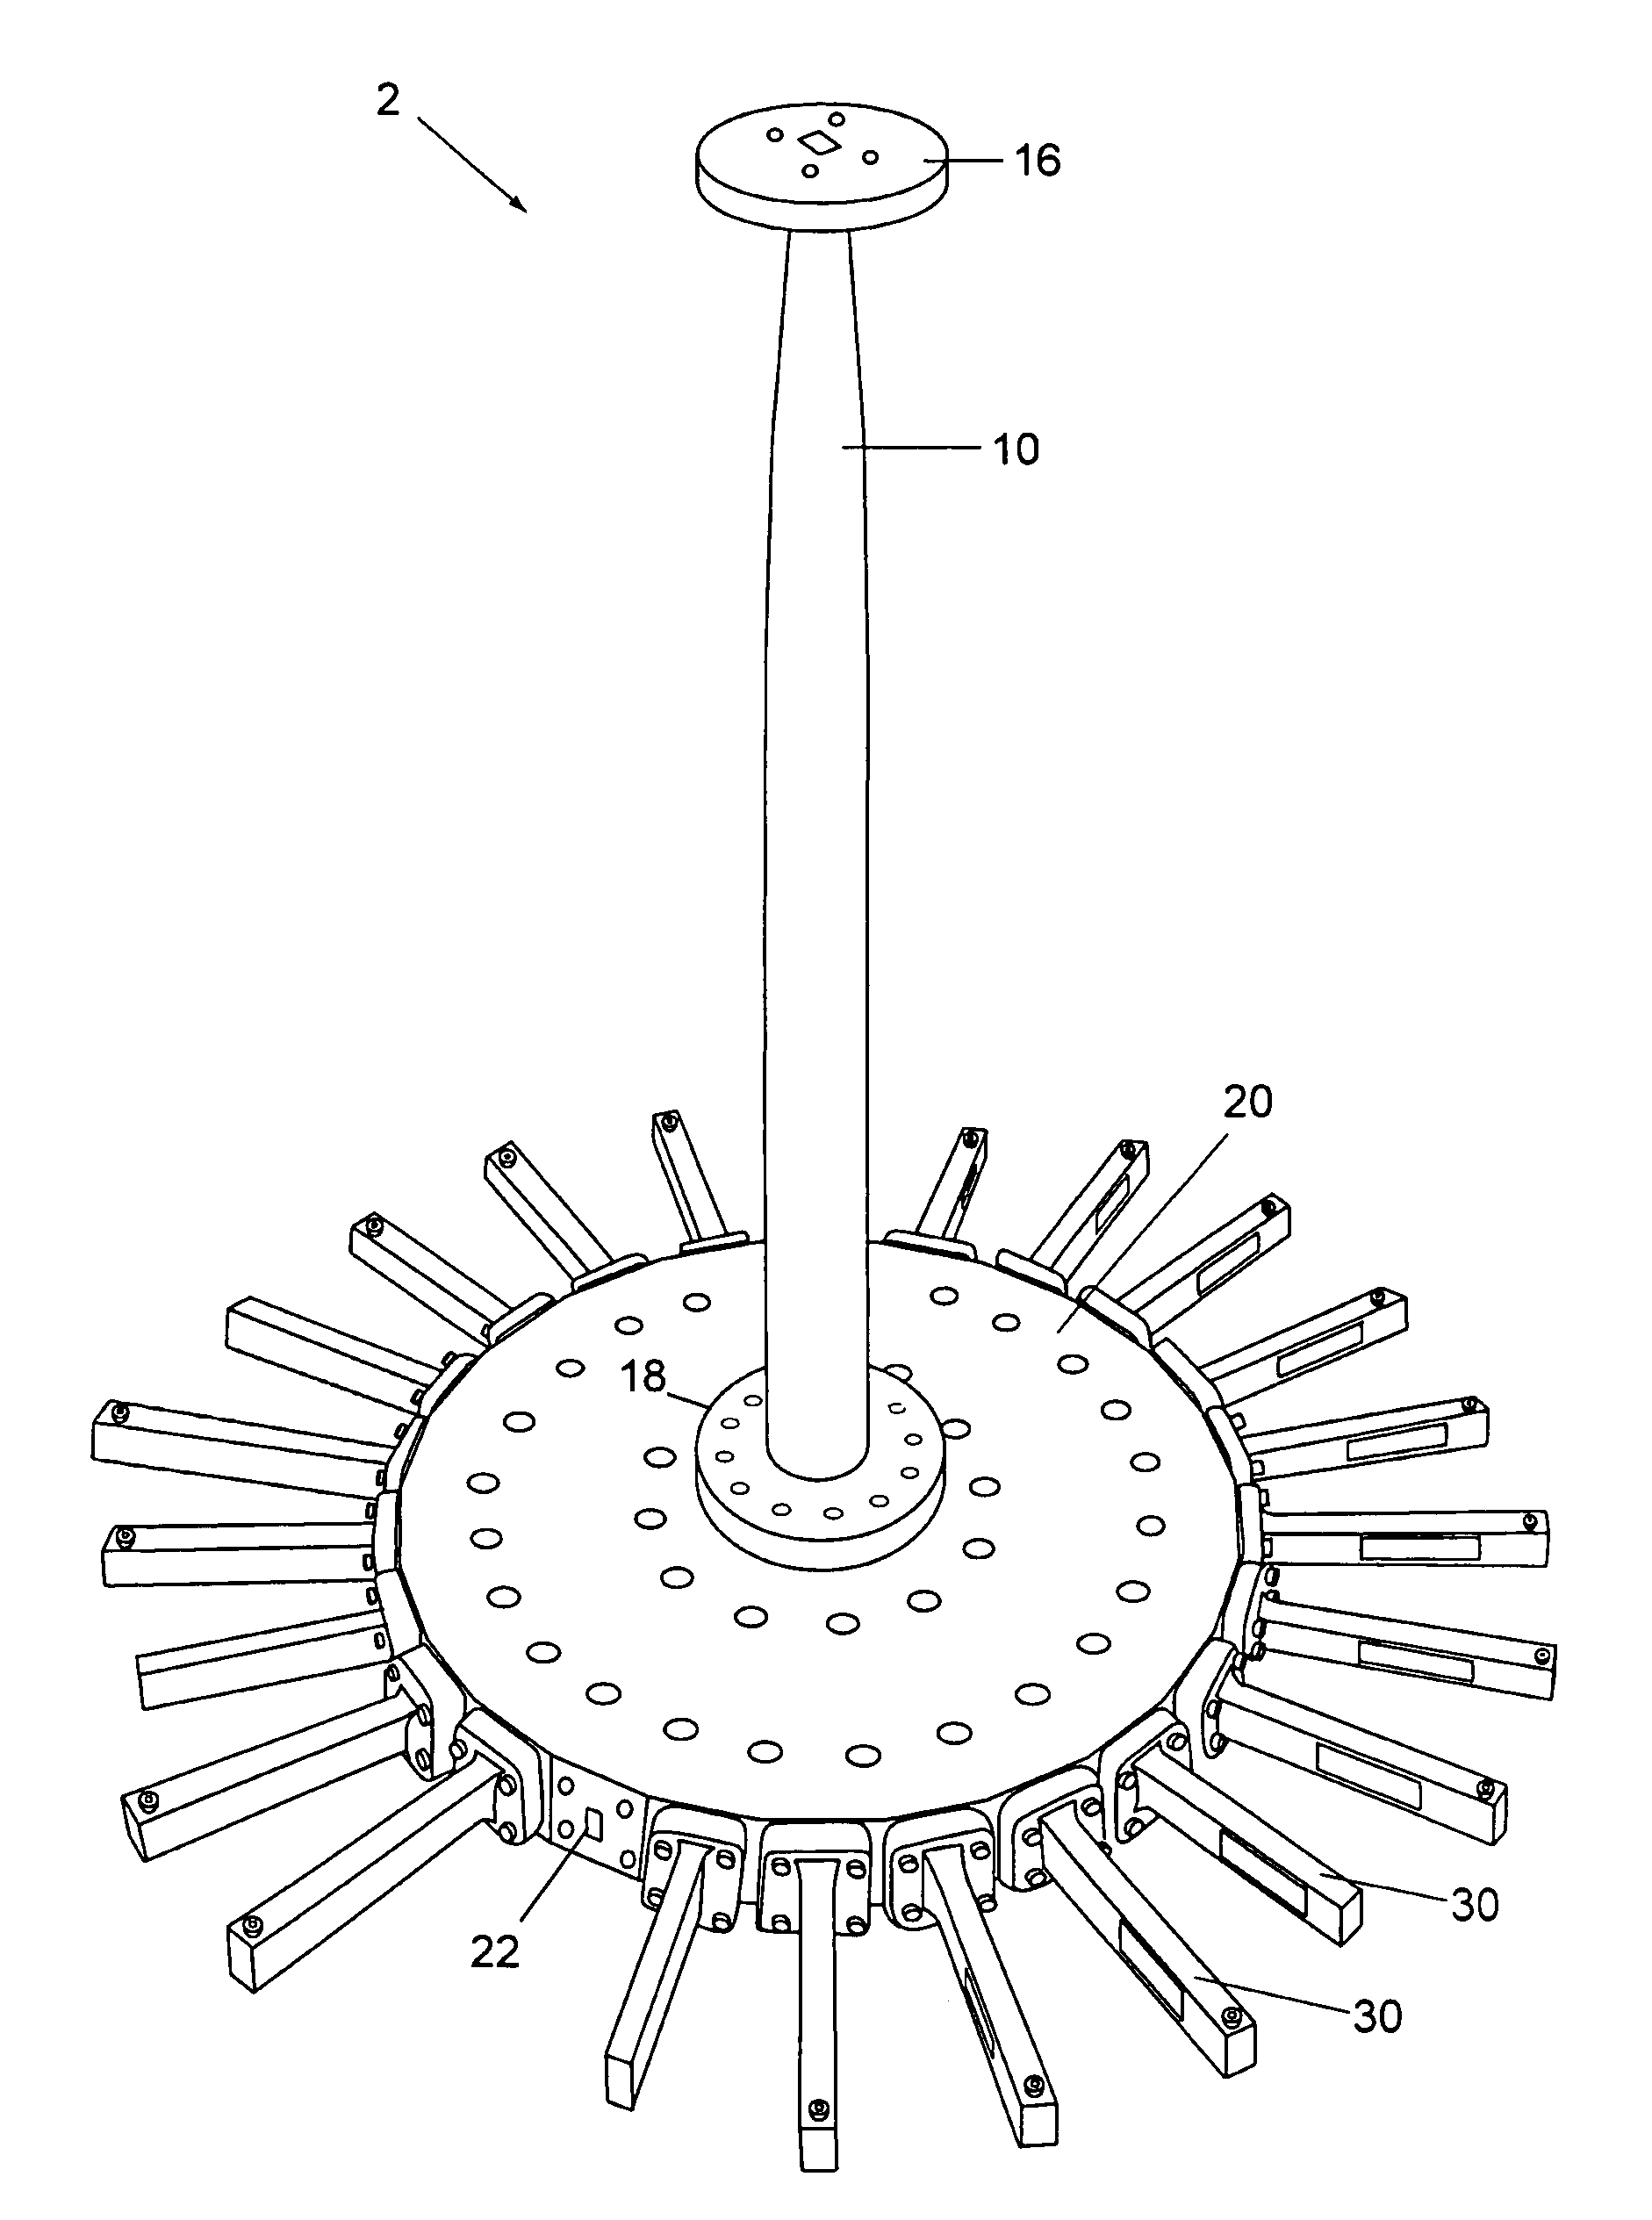 Wideband radial power combiner/divider fed by a mode transducer